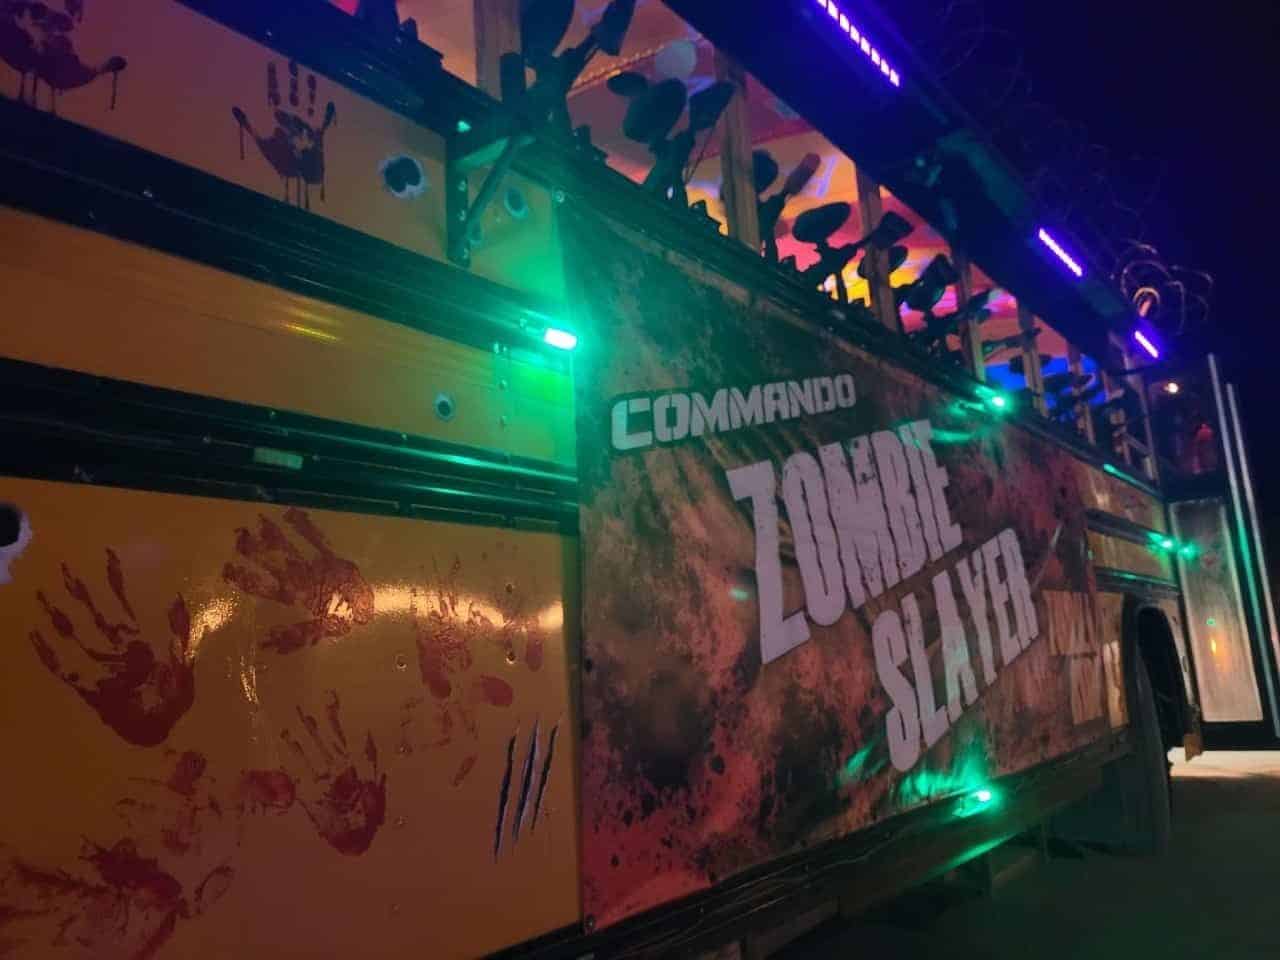 The bus of zombie slaying Halloween attraction